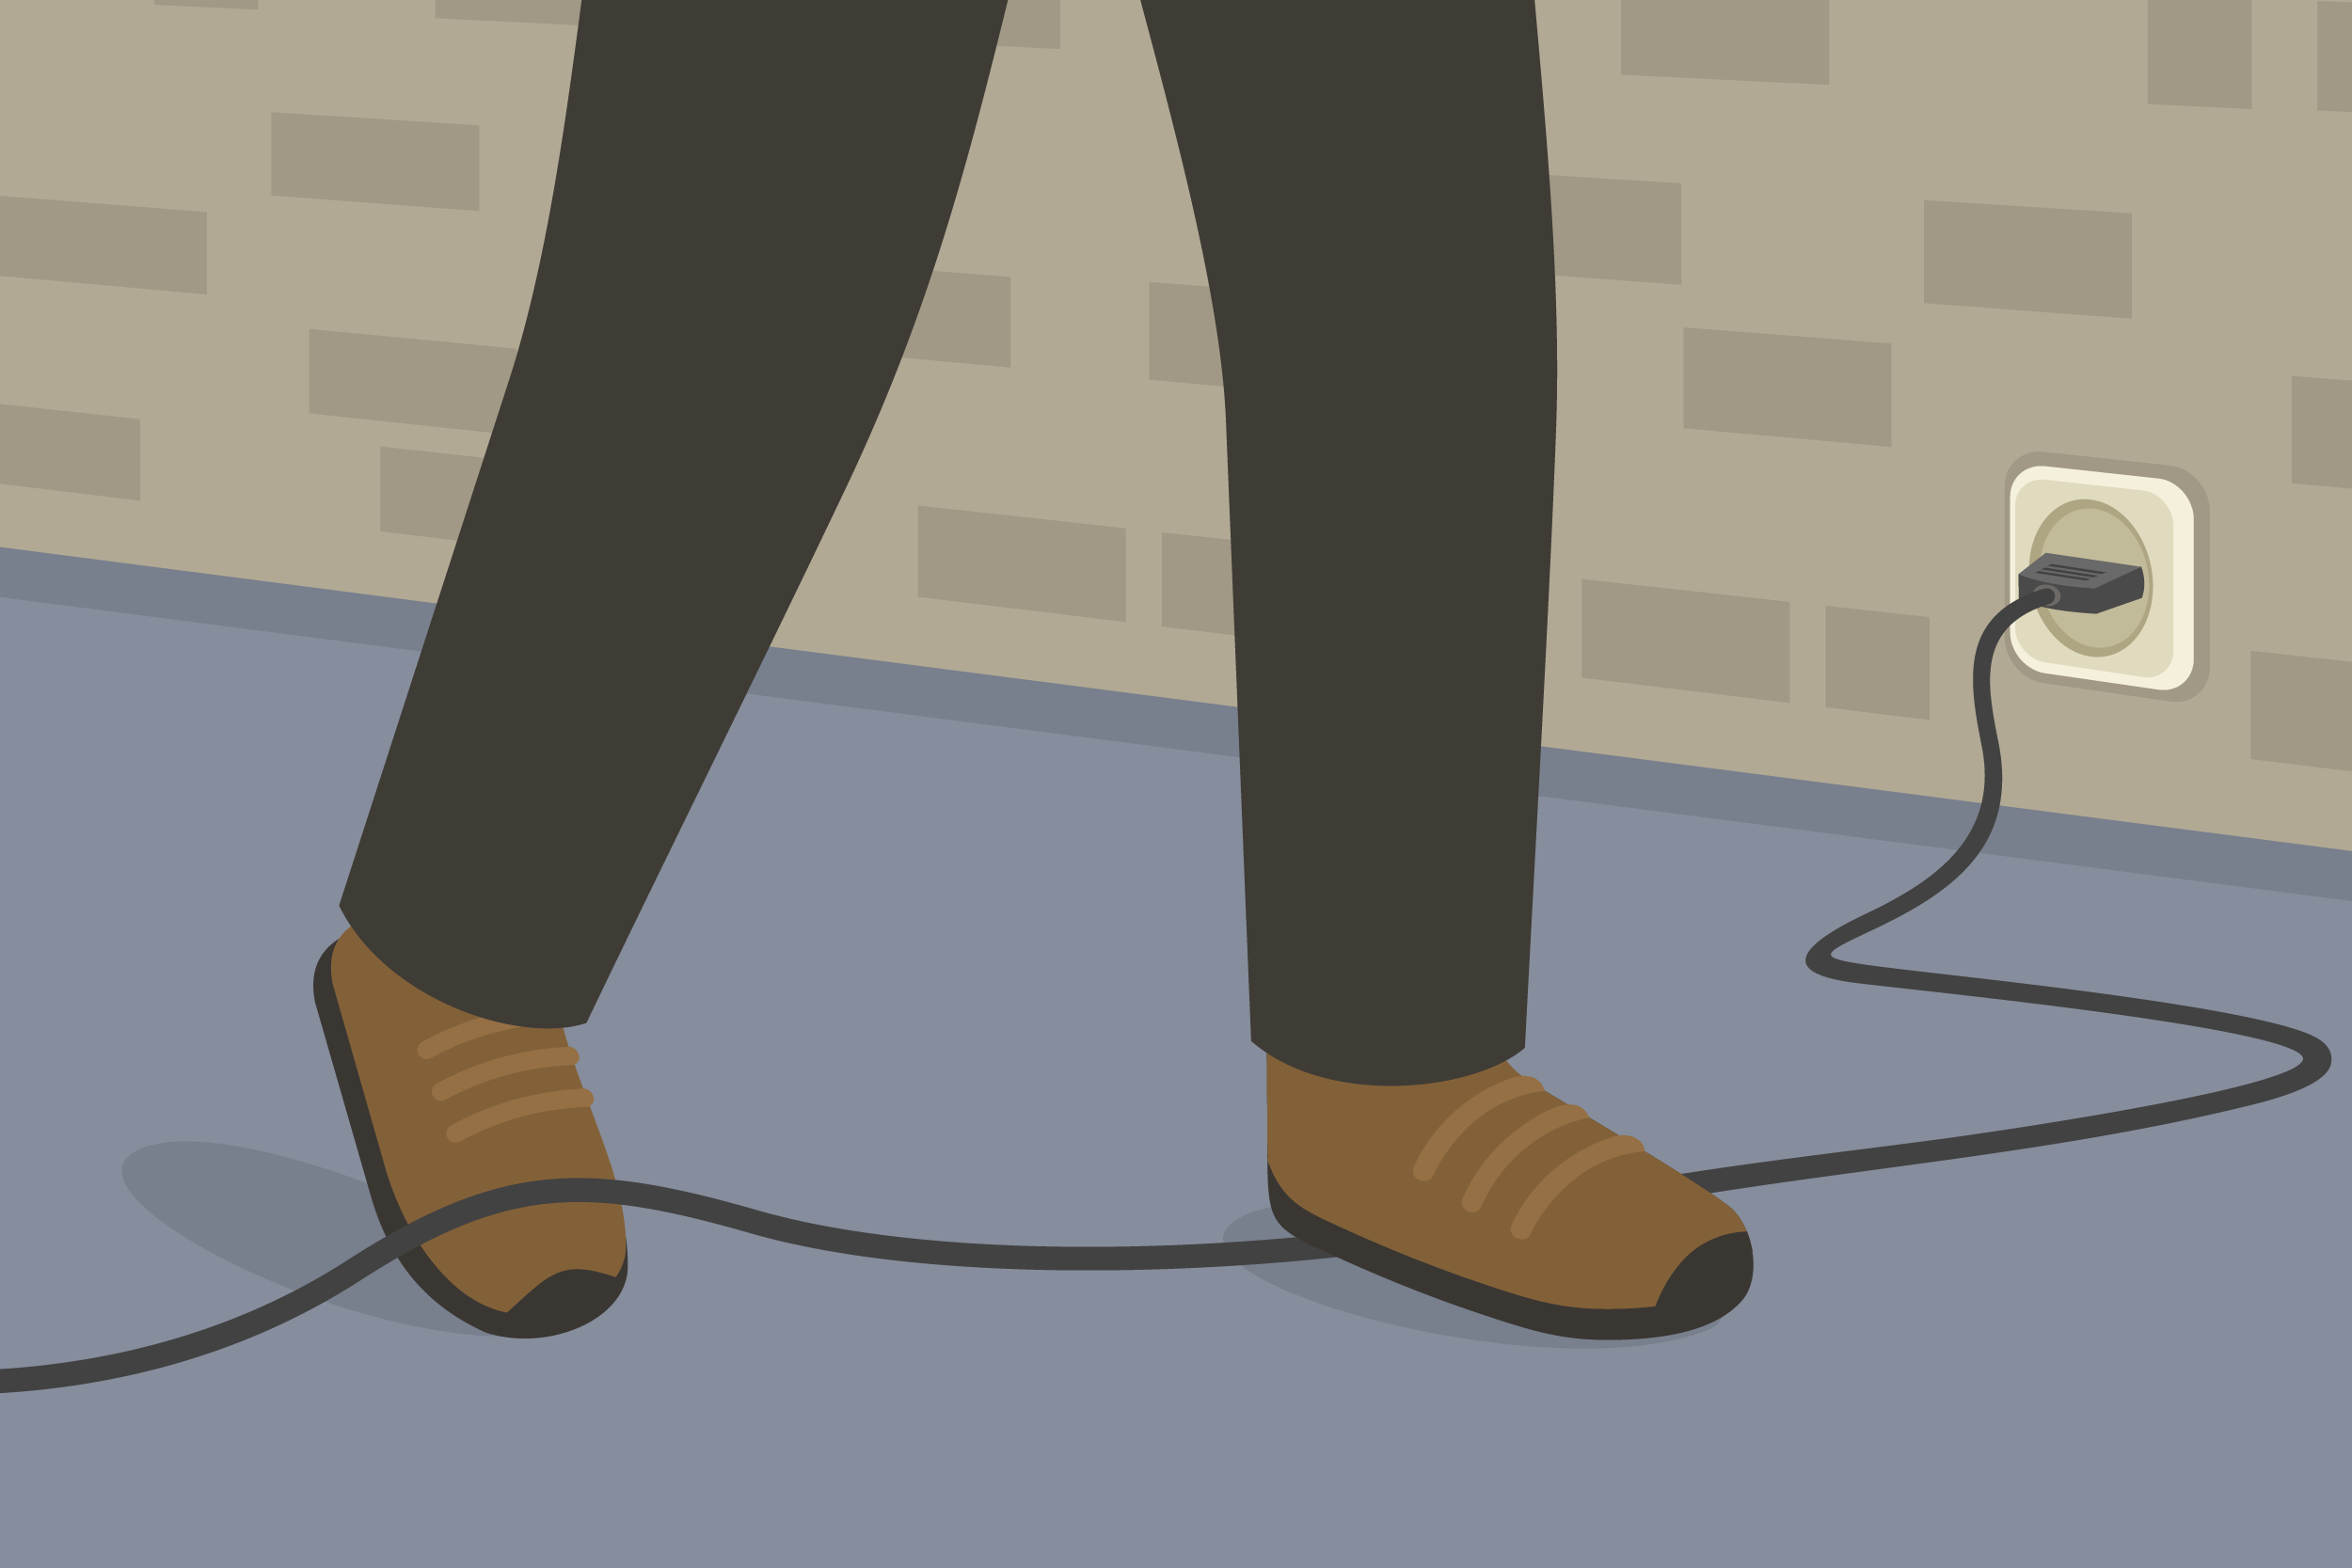 Graphic of a frontline worker tripping over an electrical cable in the workplace